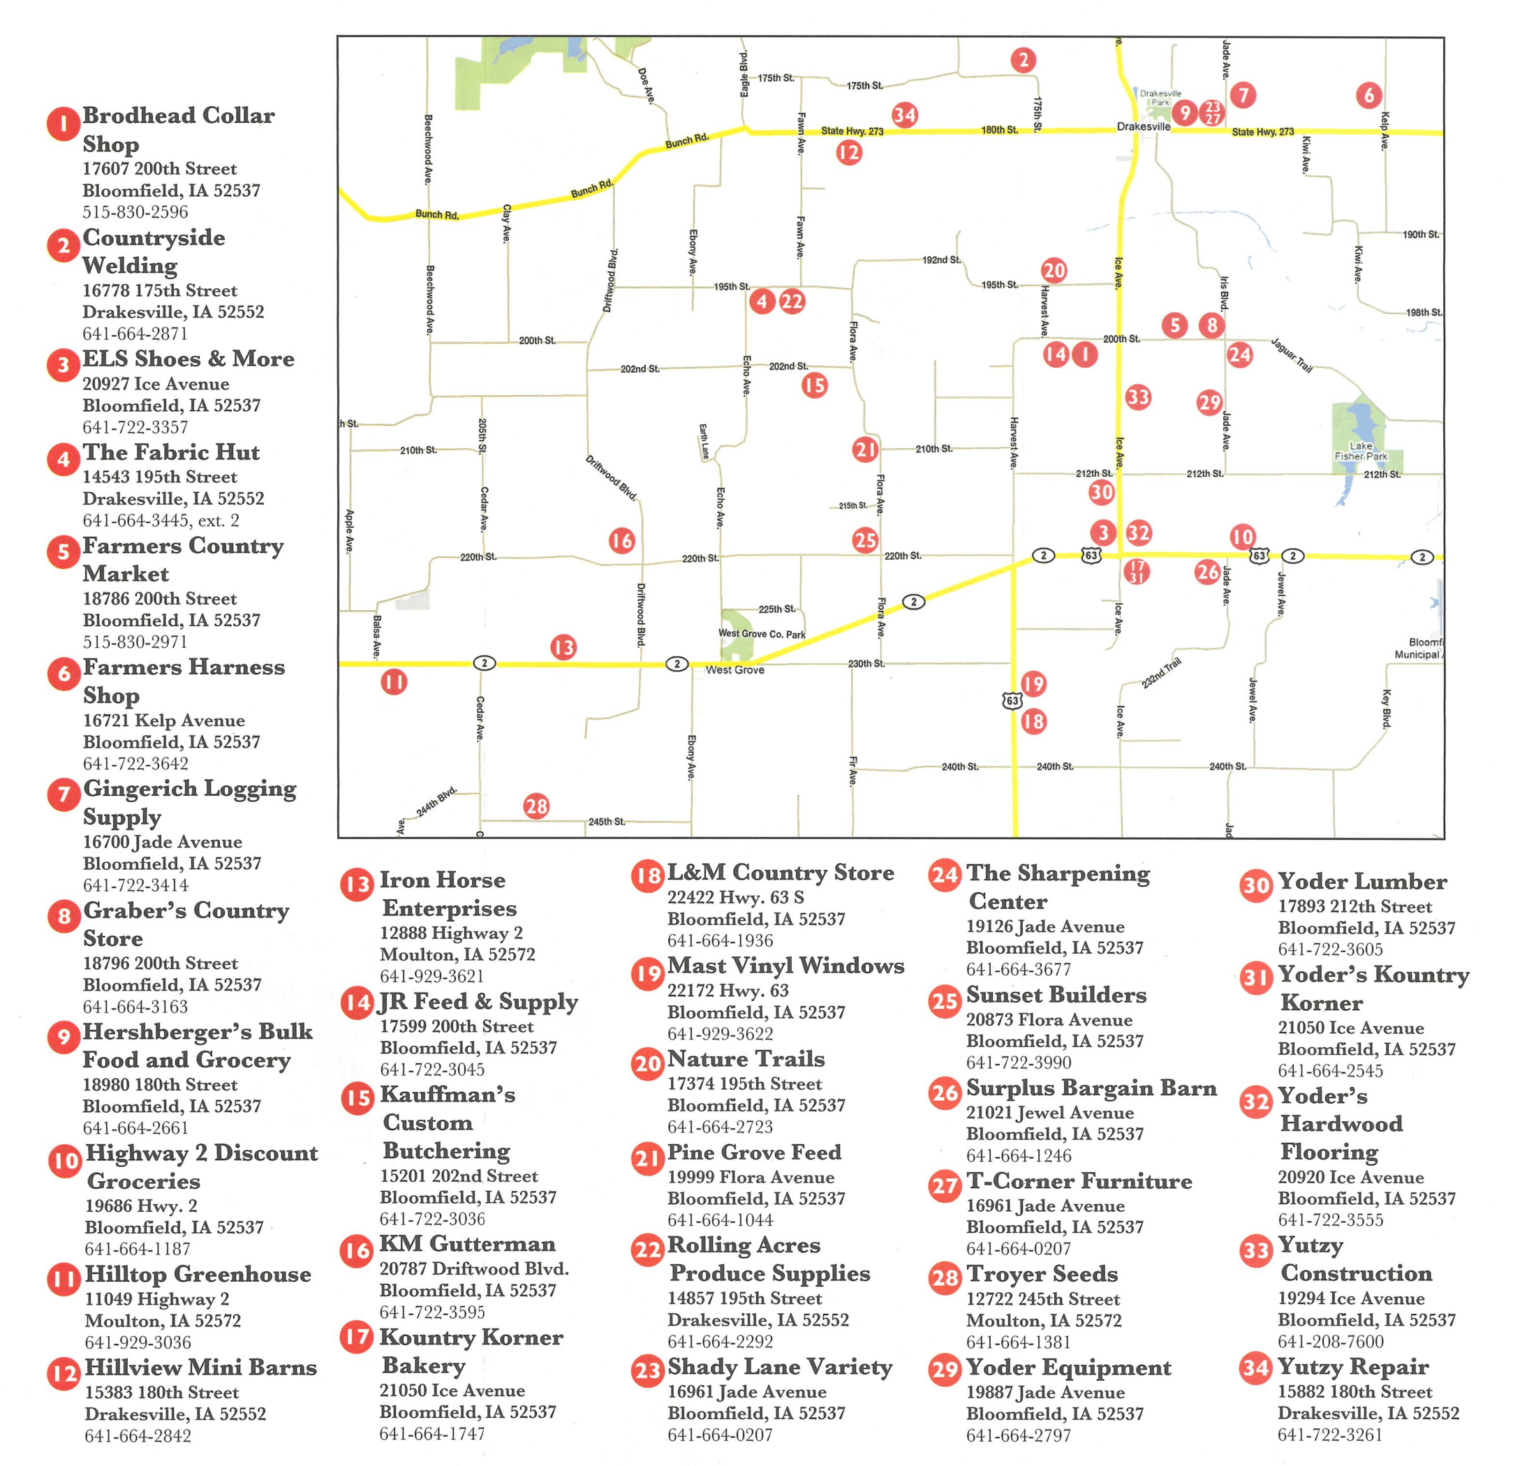 2016 Amish Business Map Min 1536x1466 